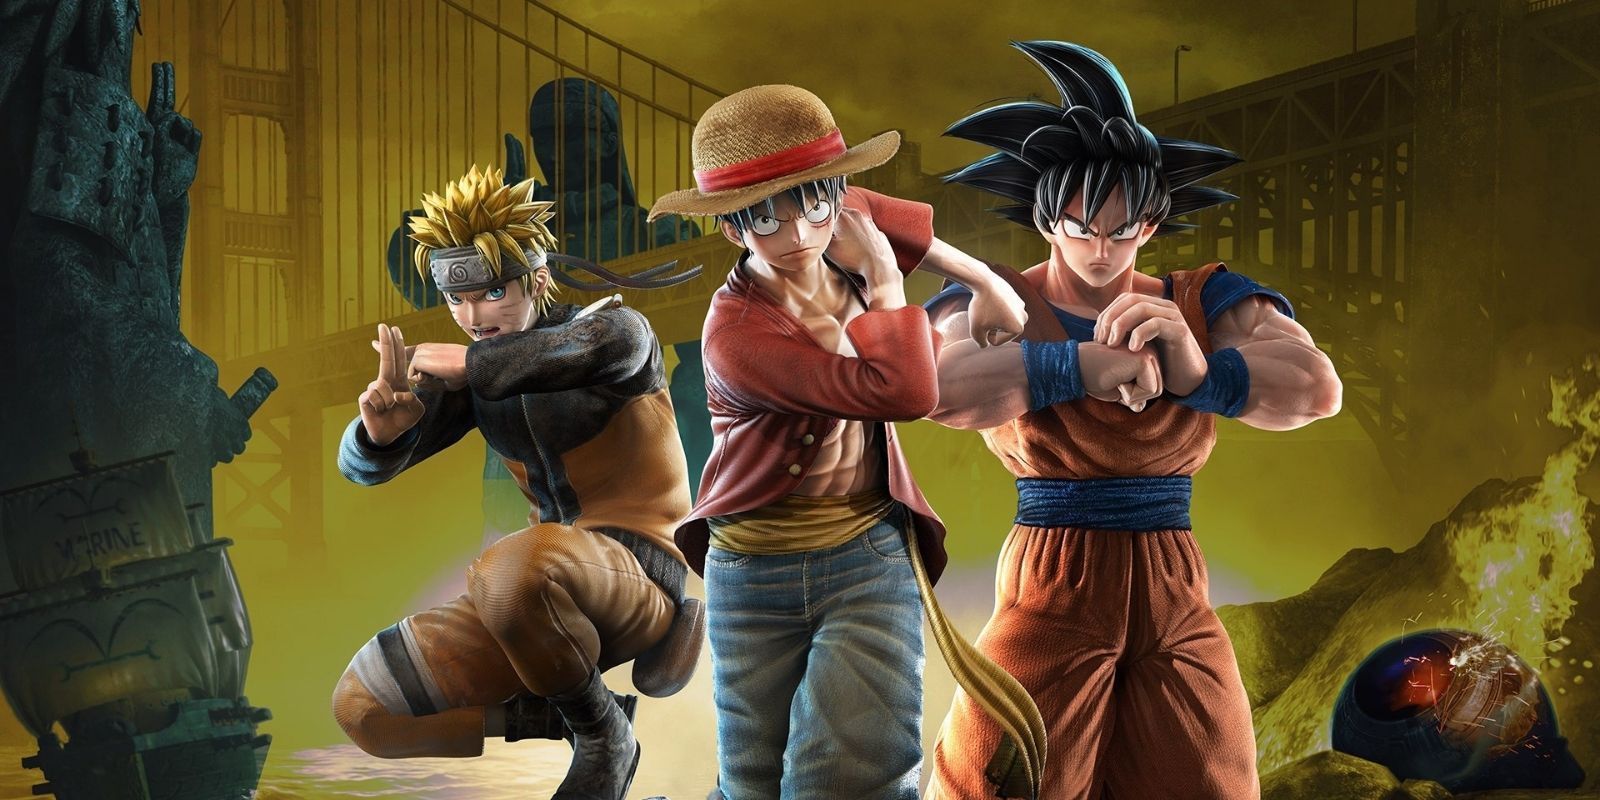 Naruto, Luffy and Goku as they appear in Bandai Namco's Jump Force